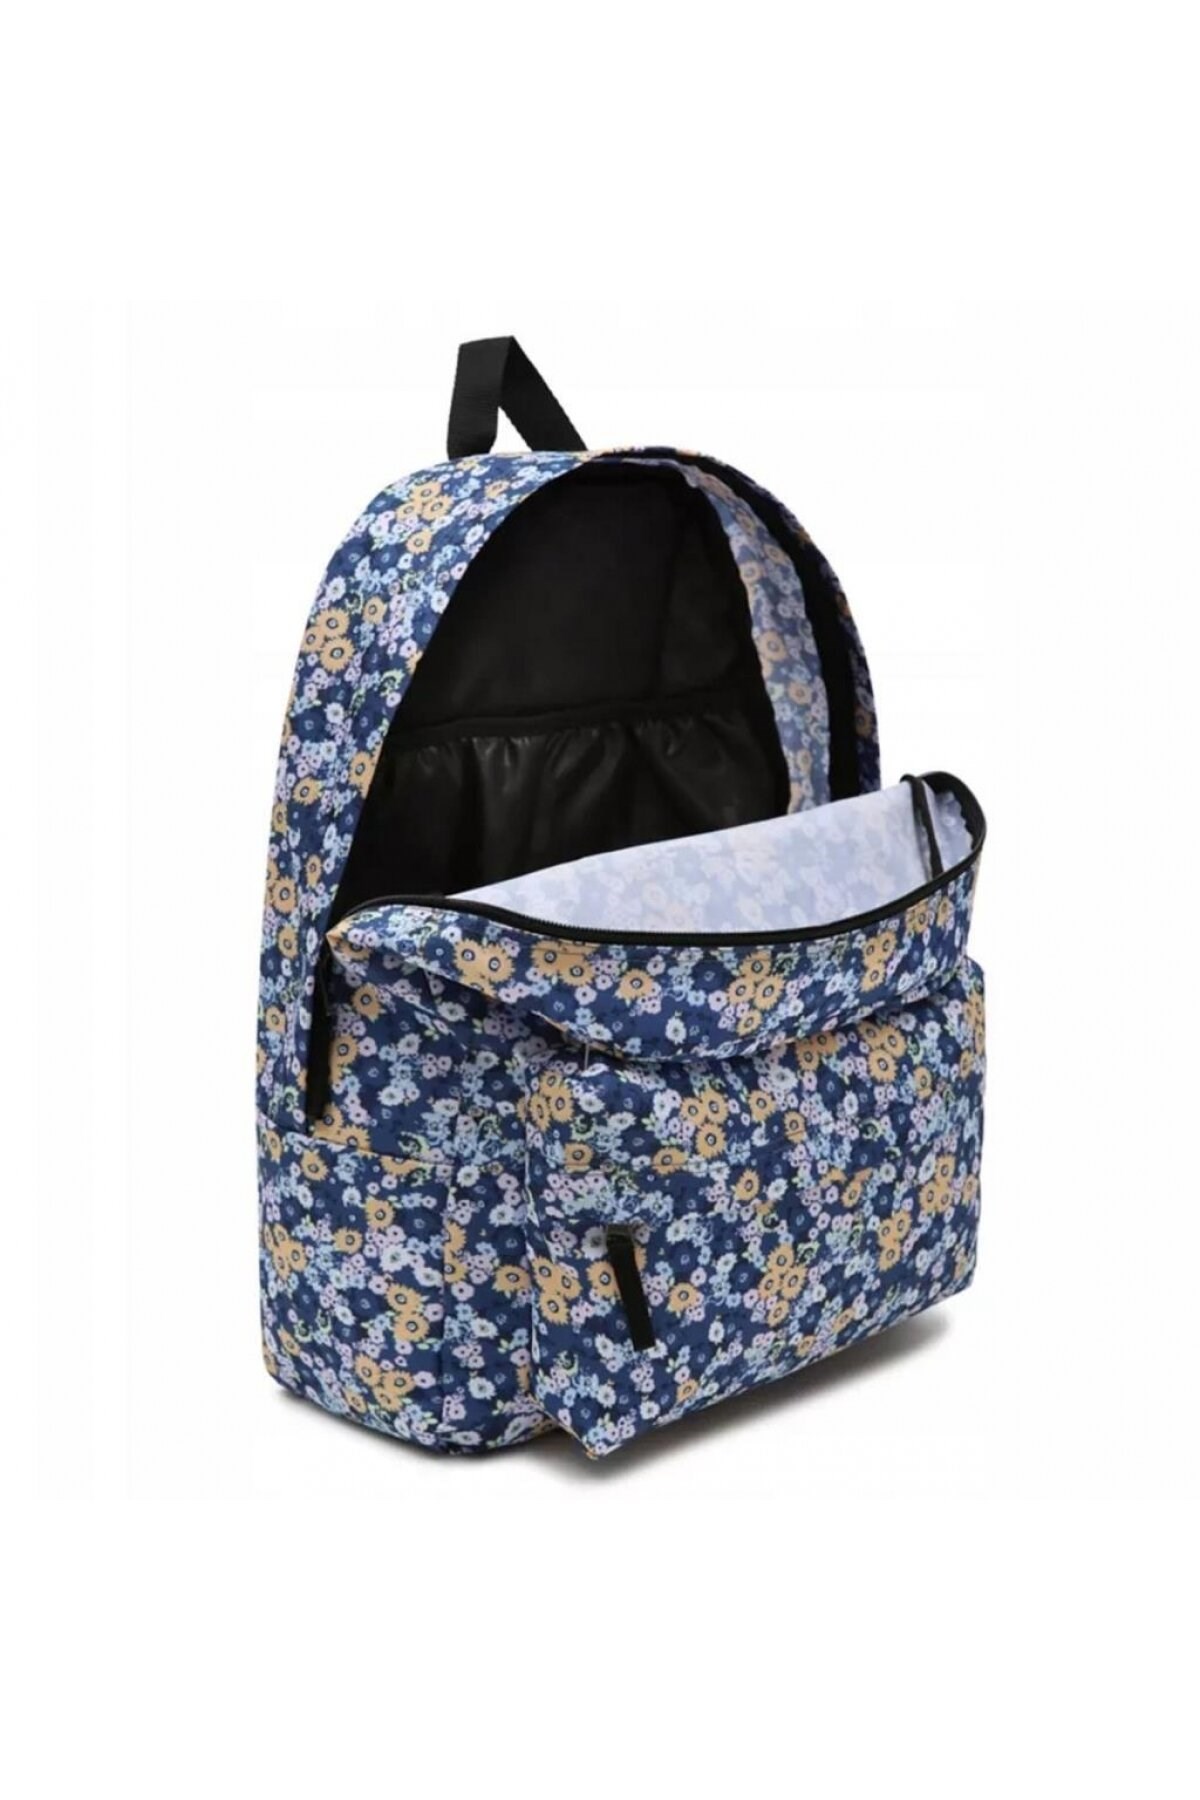 VANS REALM BACKPACK DECO DITSY VN0A3UI6YT81